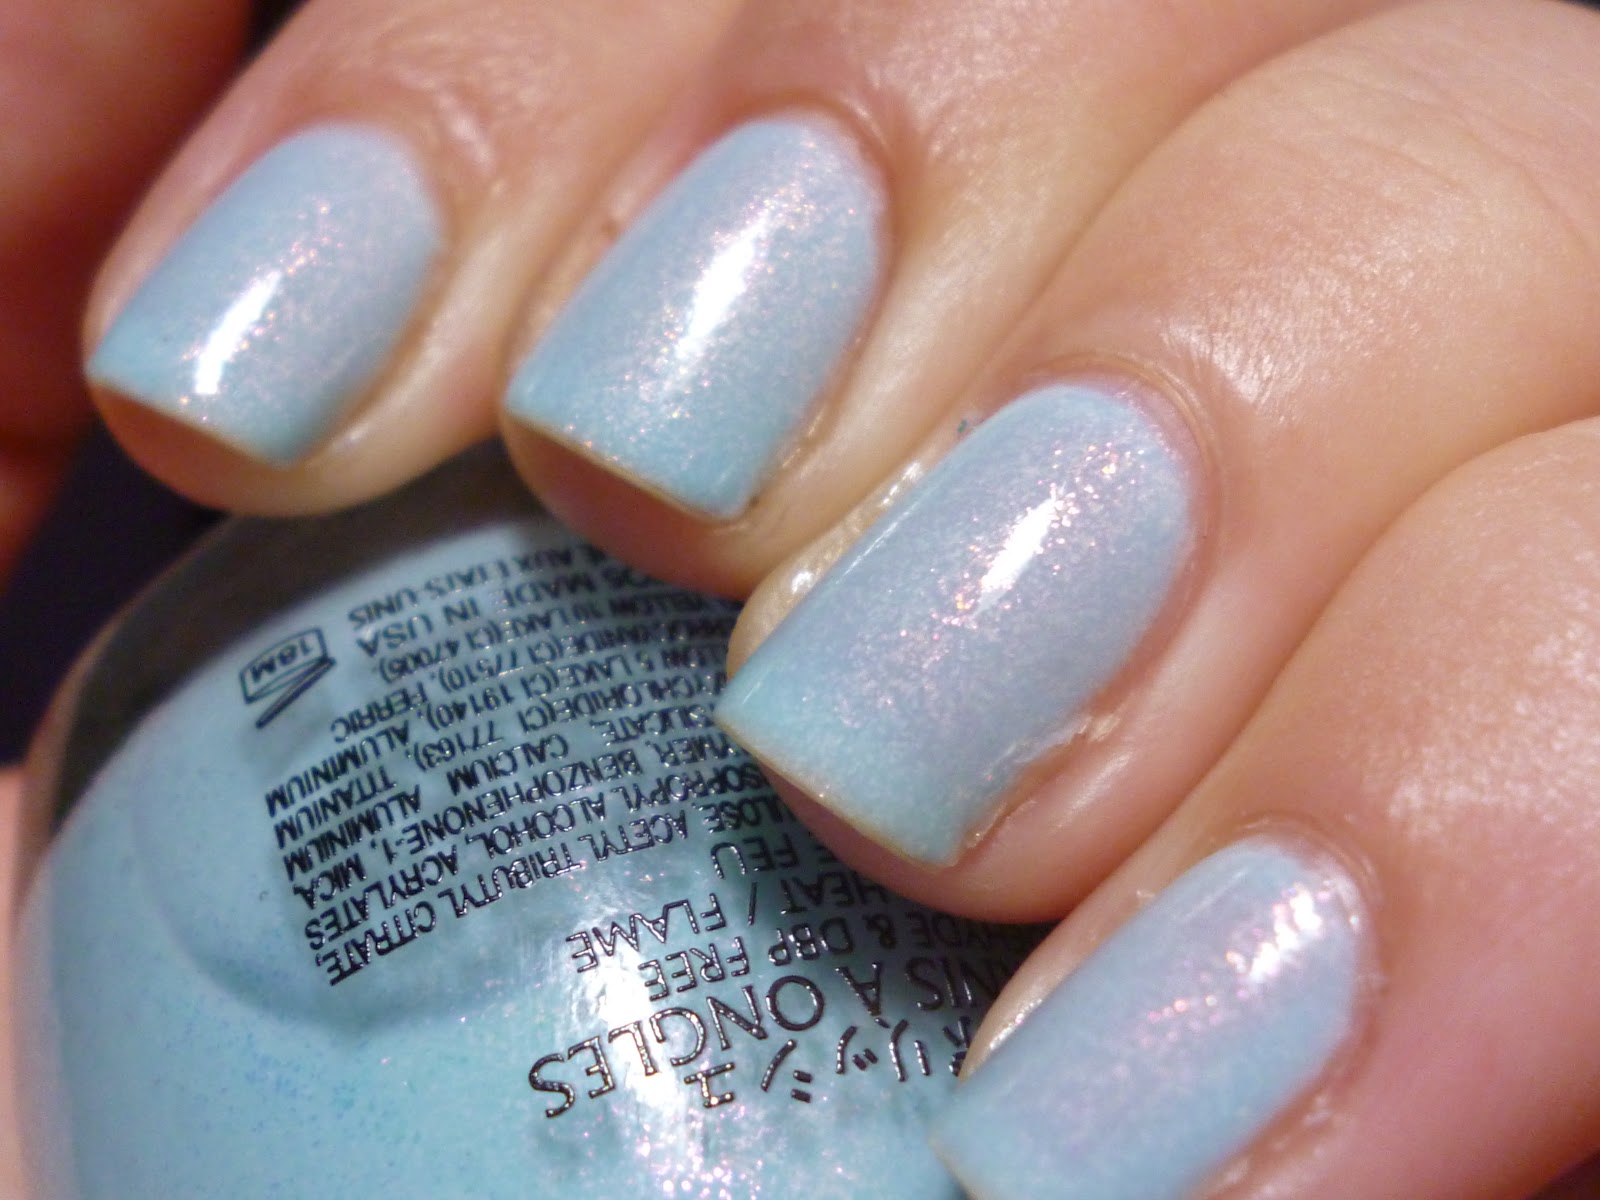 7. Sinful Colors Professional Nail Polish in "Cinderella" - wide 3